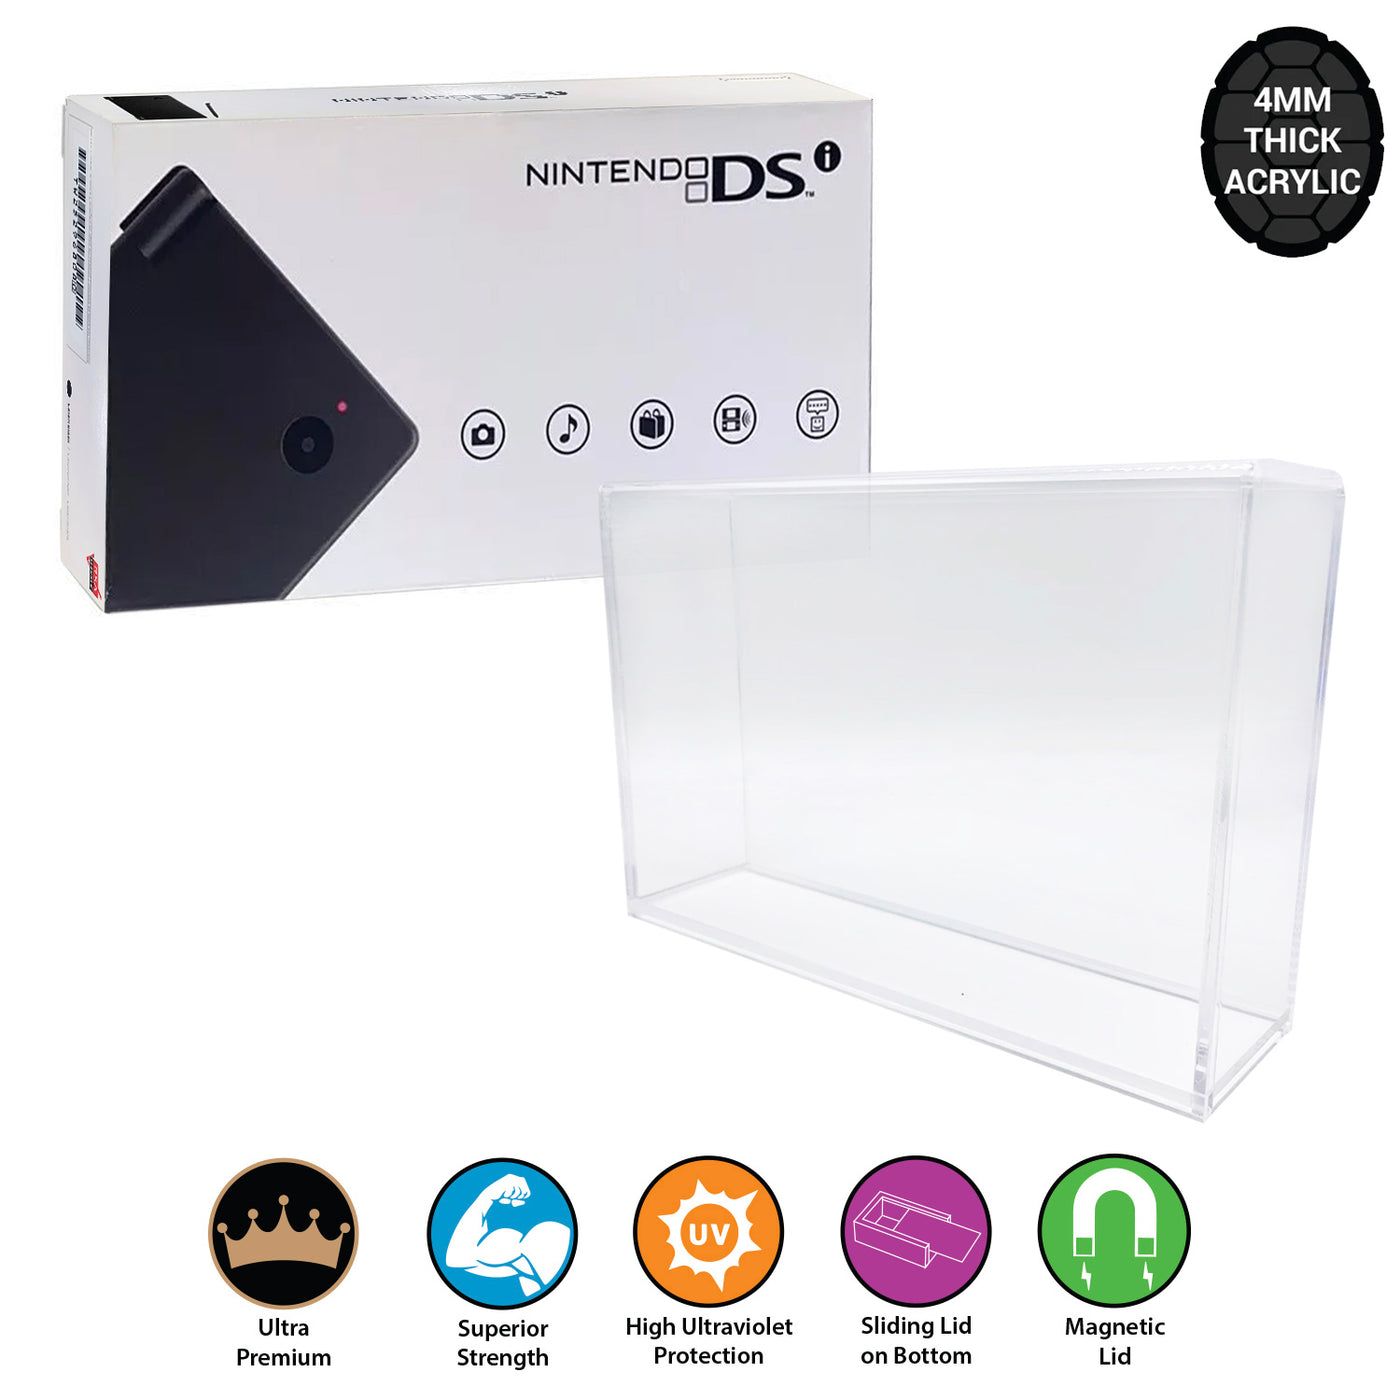 Acrylic Case for NINTENDO DSi Video Game Console Box 4mm thick, UV & Slide Bottom on The Pop Protector Guide by Display Geek